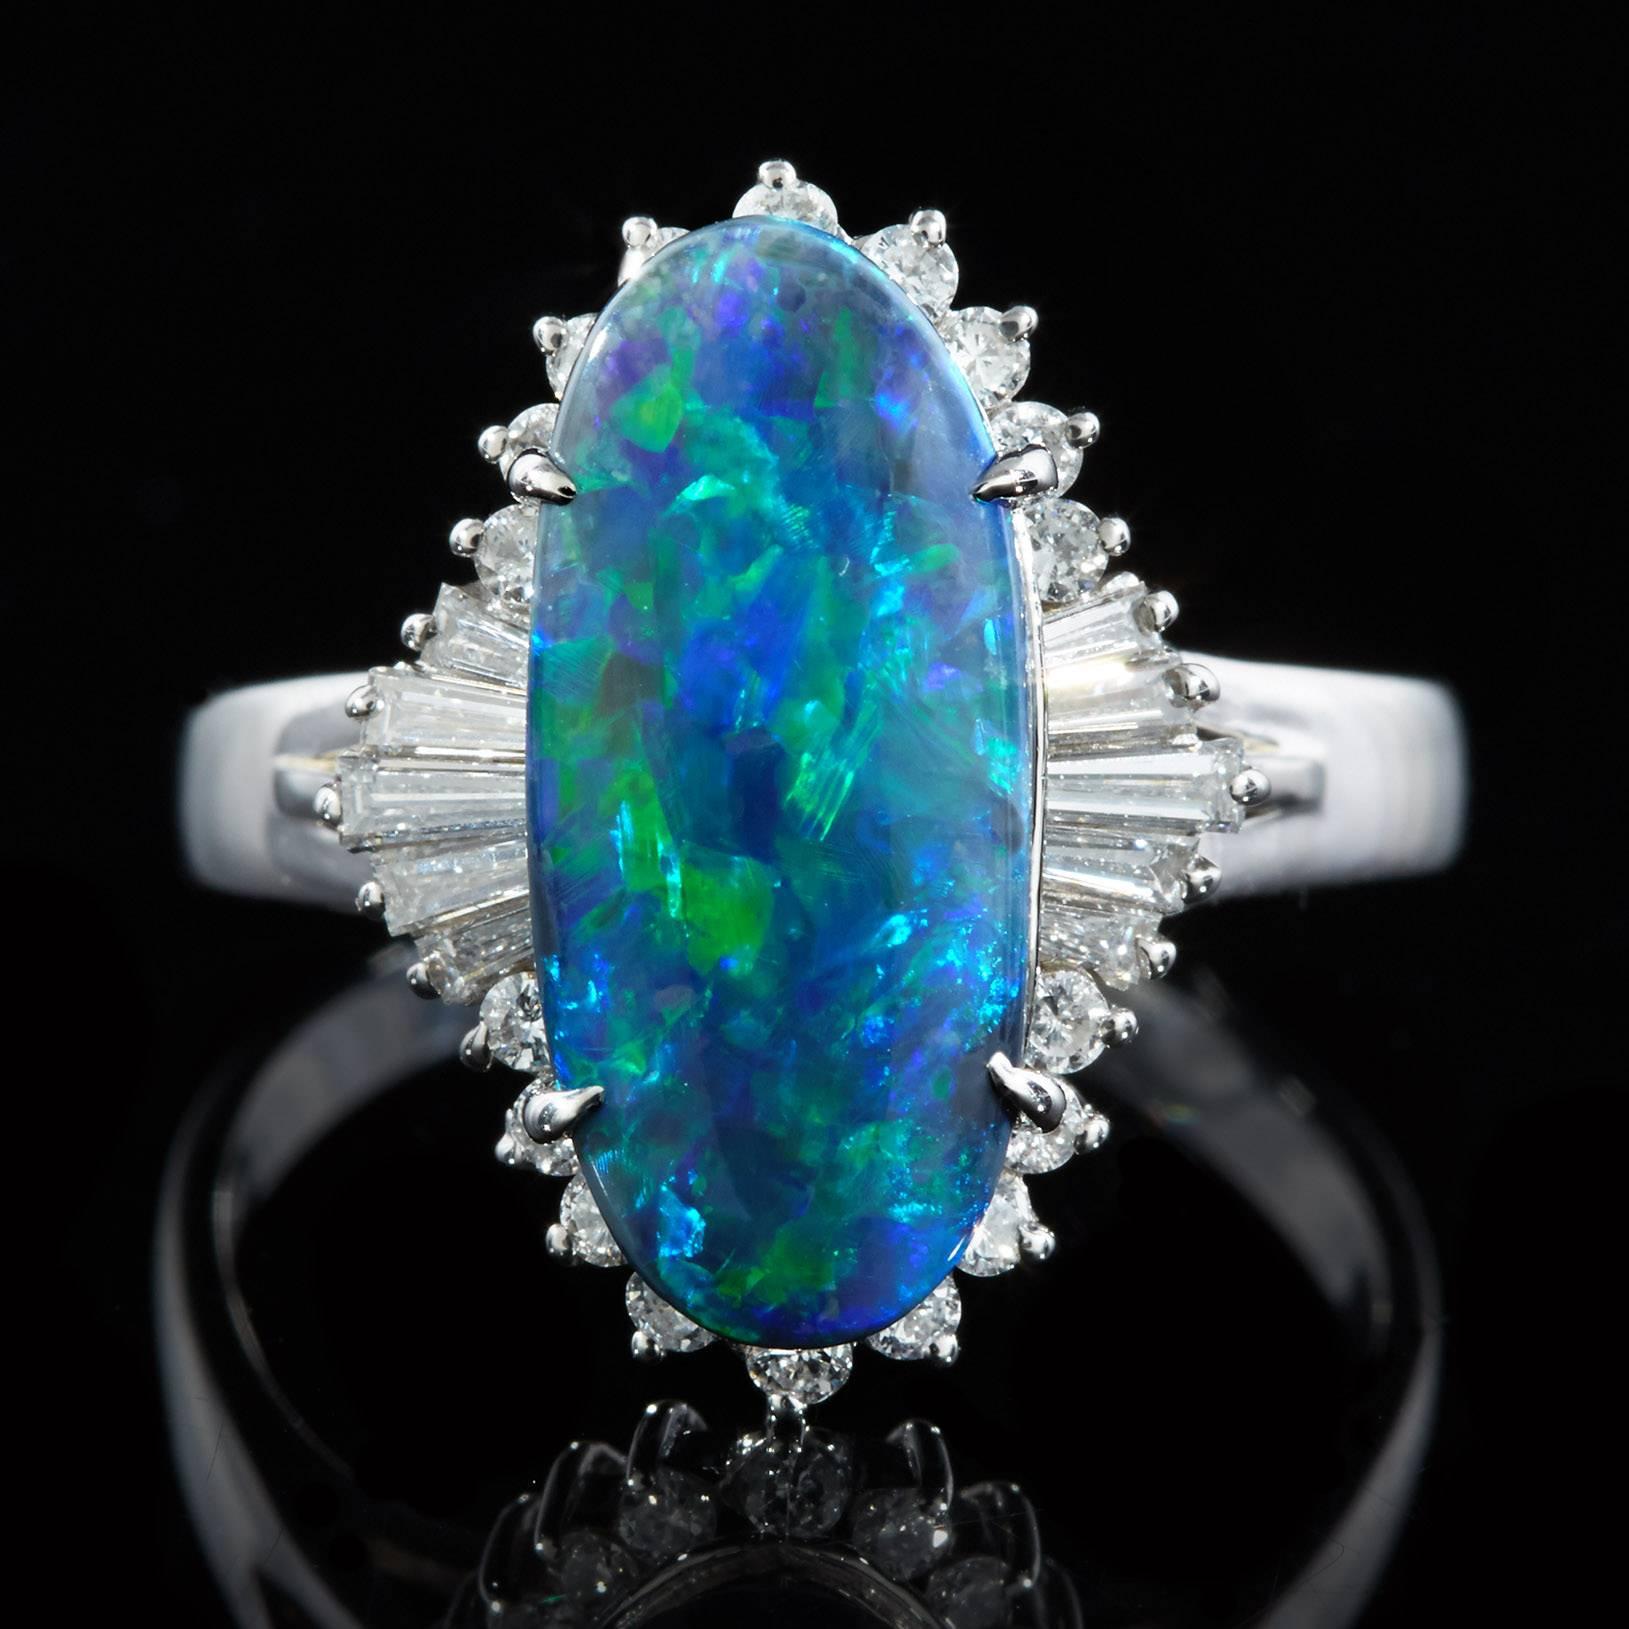 Fabulous Platinum Ring features a Cabochon Cut Black Opal displaying Blue and Green Play of Color. This opal measures 15.71 x 7.0 mm. A total of 28 round brilliant cut and tapered baguette cut diamonds surrounds the opal with a total of 0.47 carats.